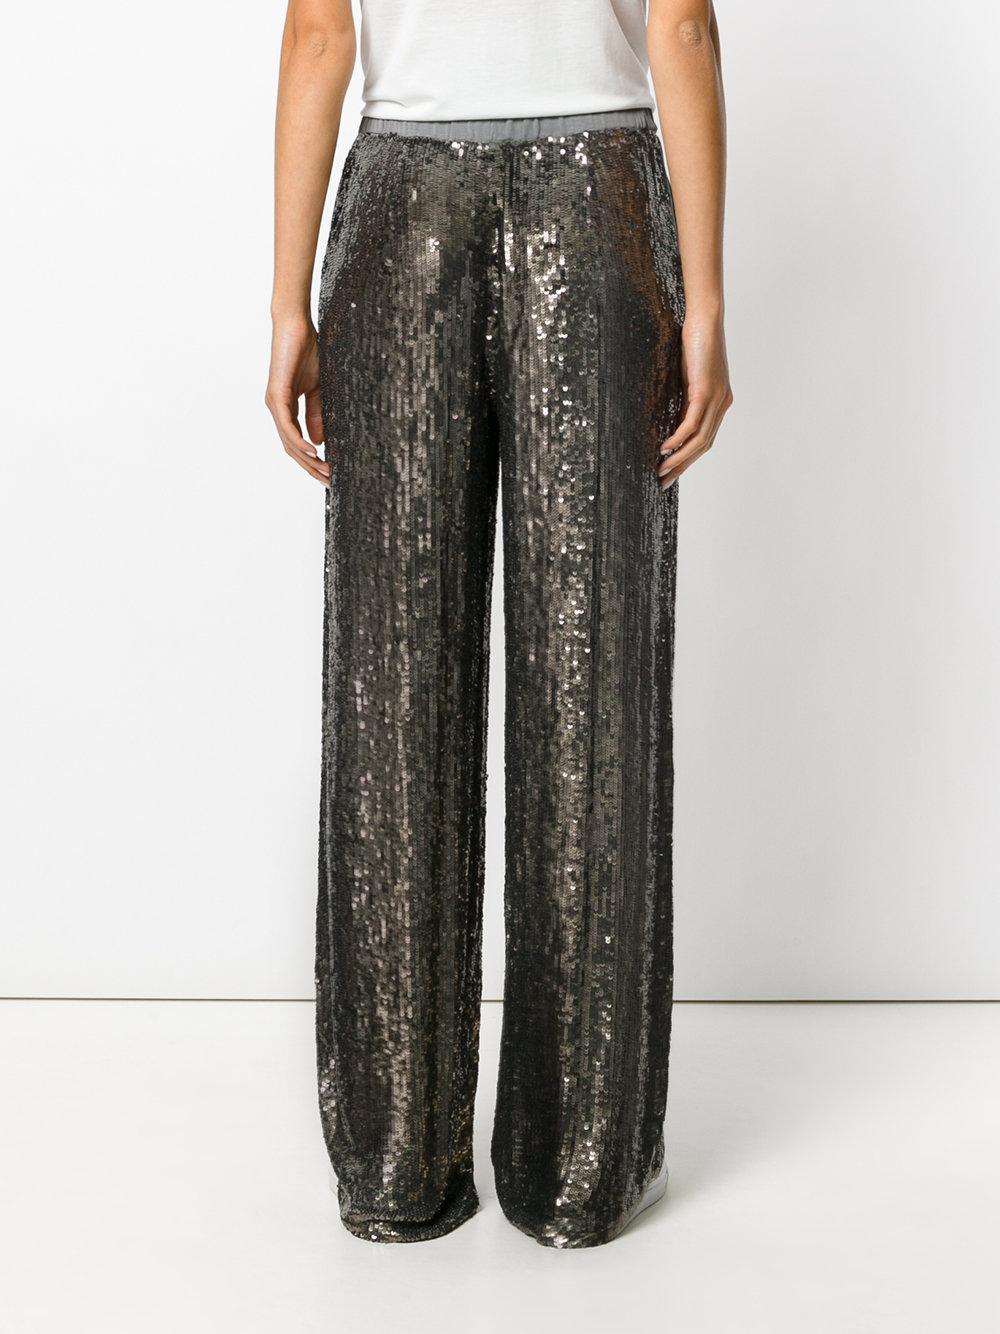 Lyst - P.A.R.O.S.H. Sequinned Track Pants in Metallic